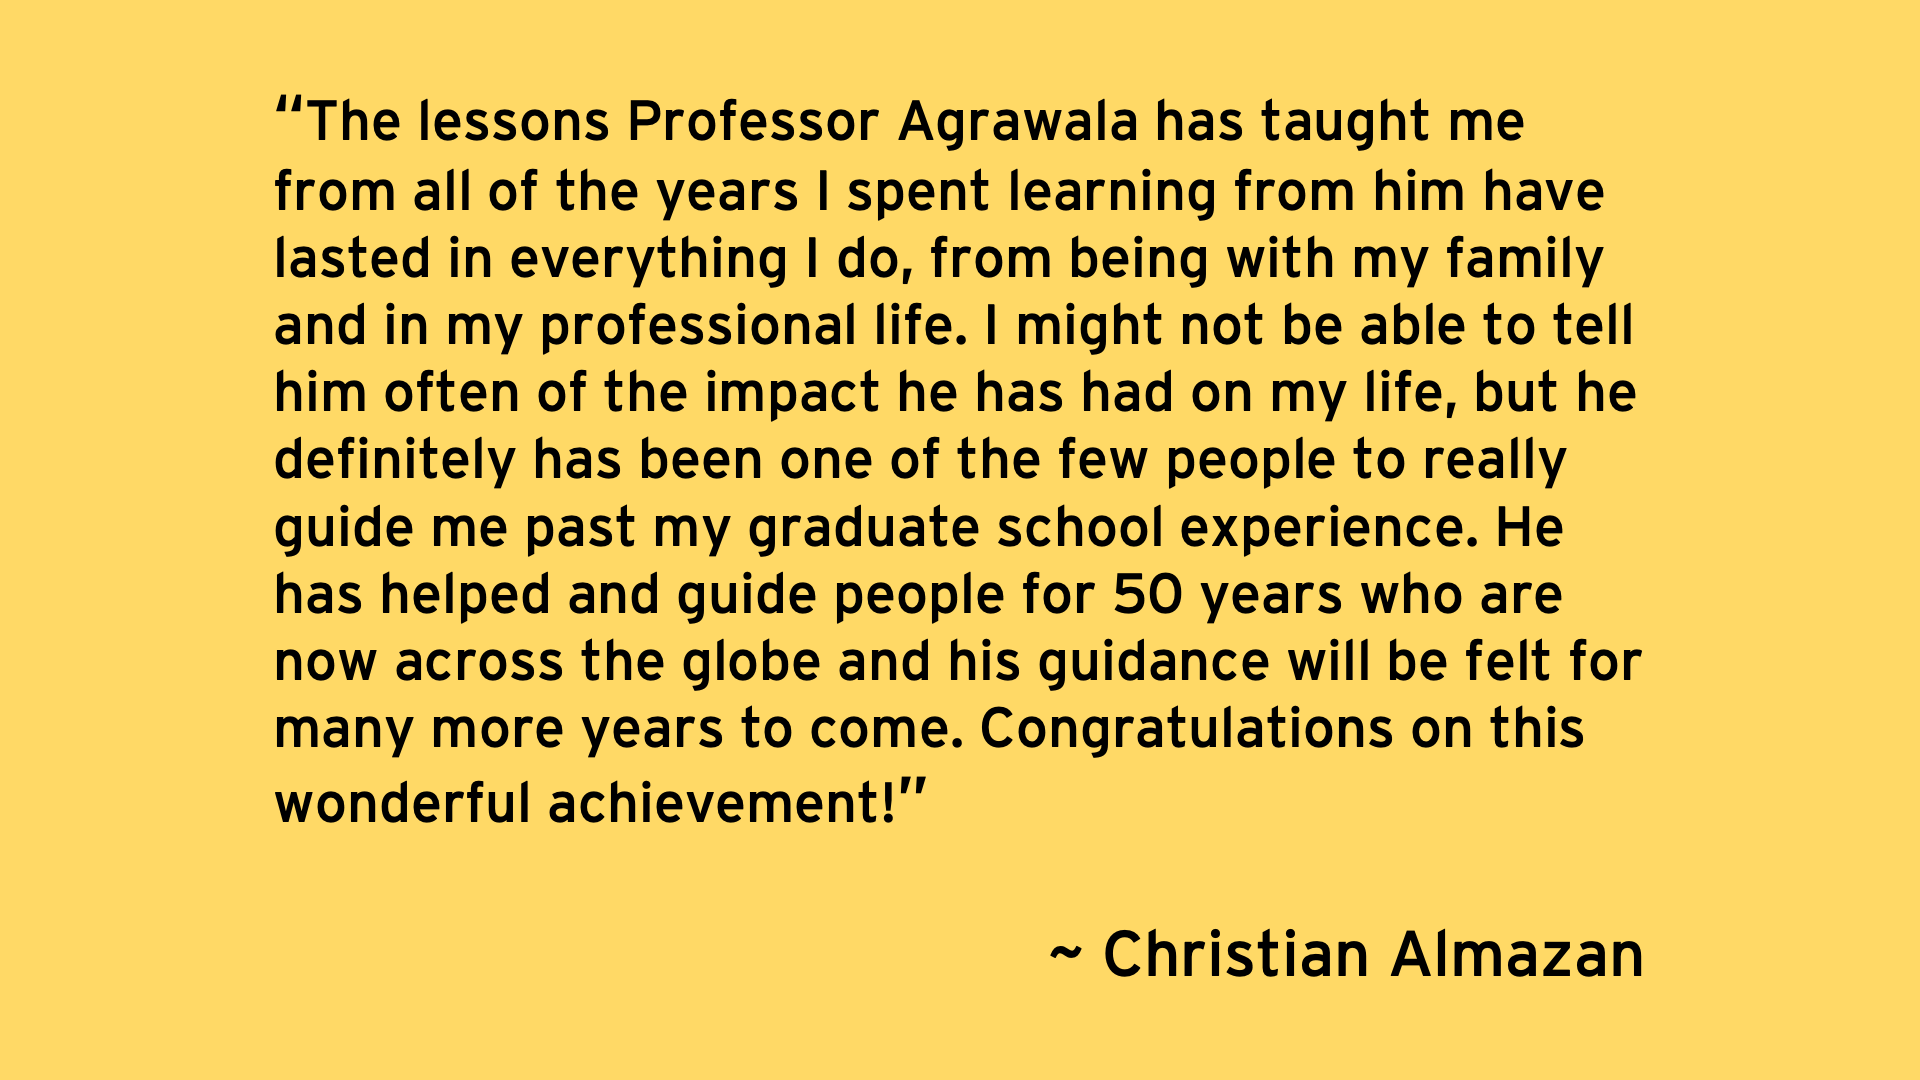 The lessons Professor Agrawala has taught me from all of the years I spent learning from him have lasted in everything I do, from being with my family and in my professional life. I might not be able to tell him often of the impact he has had on my life, but he definitely has been one of the few people to really guide me past my graduate school experience. He has helped and guide people for 50 years who are now across the globe and his guidance will be felt for many more years to come. - Christian Almazan